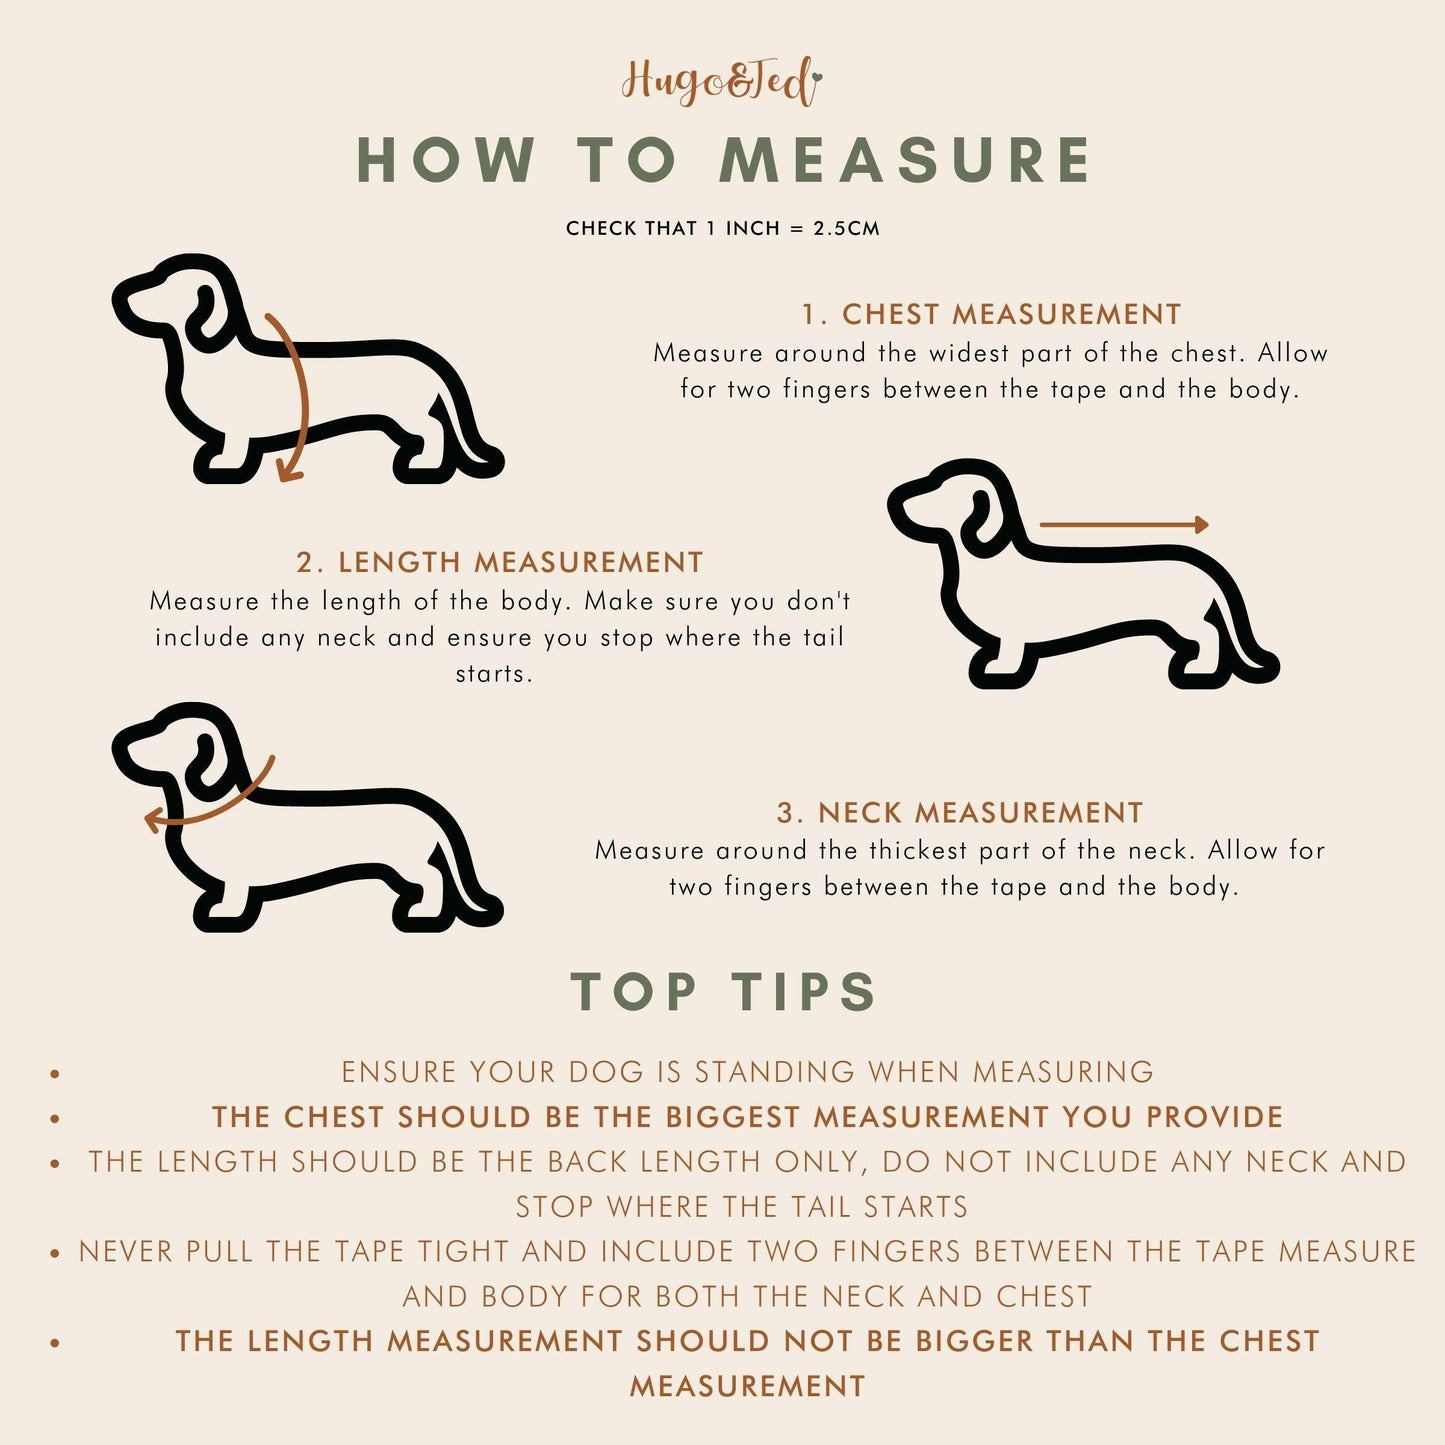 Hugo and Ted measurement guide for measuring your dog